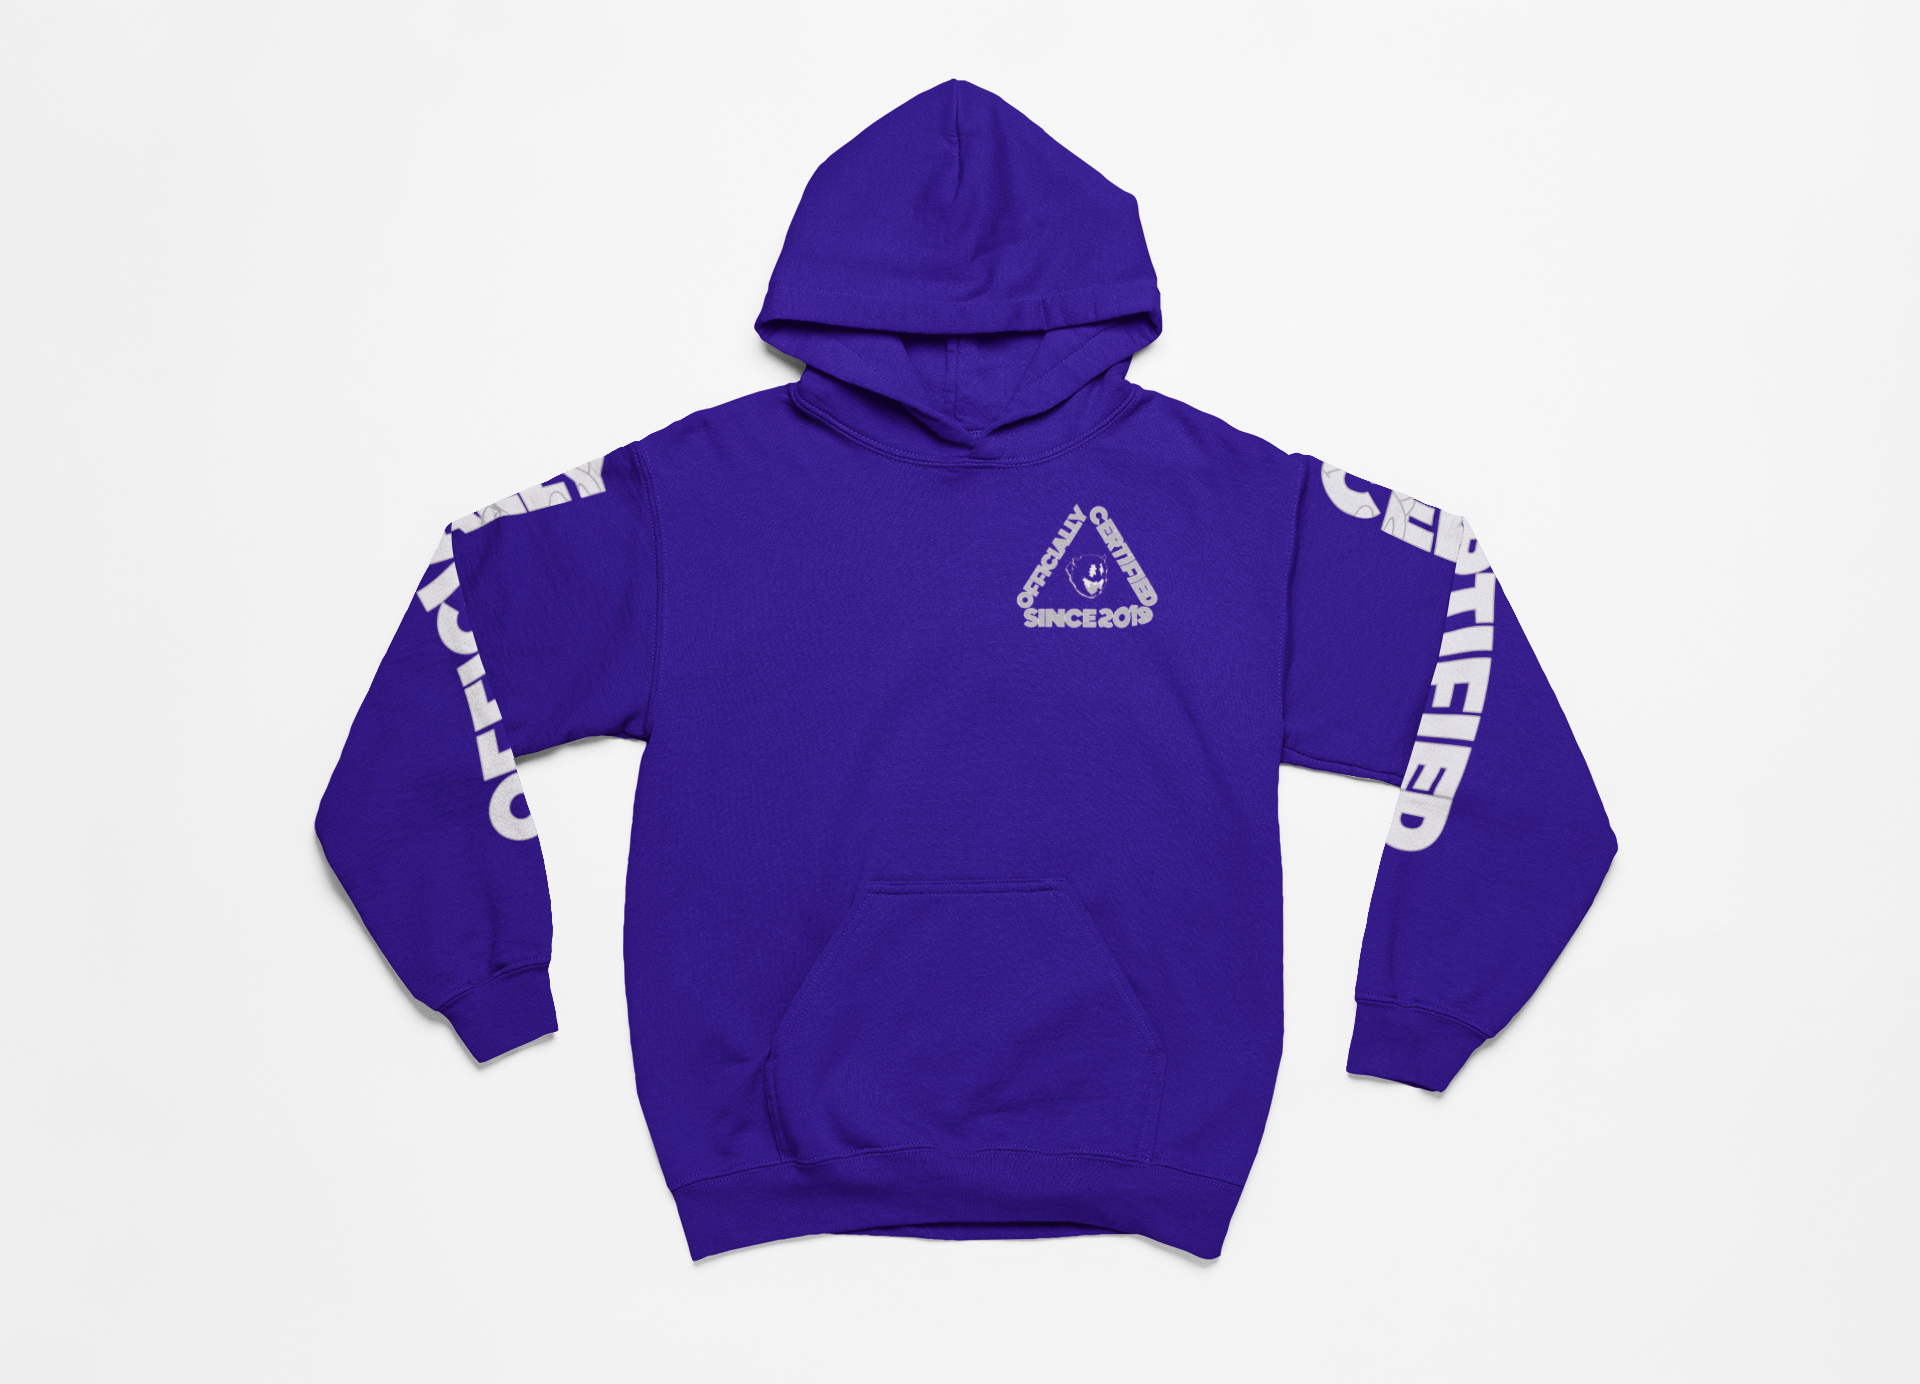 mockup-of-a-pullover-hoodie-flat-laid-over-a-color-customizable-background-m30561-2.png